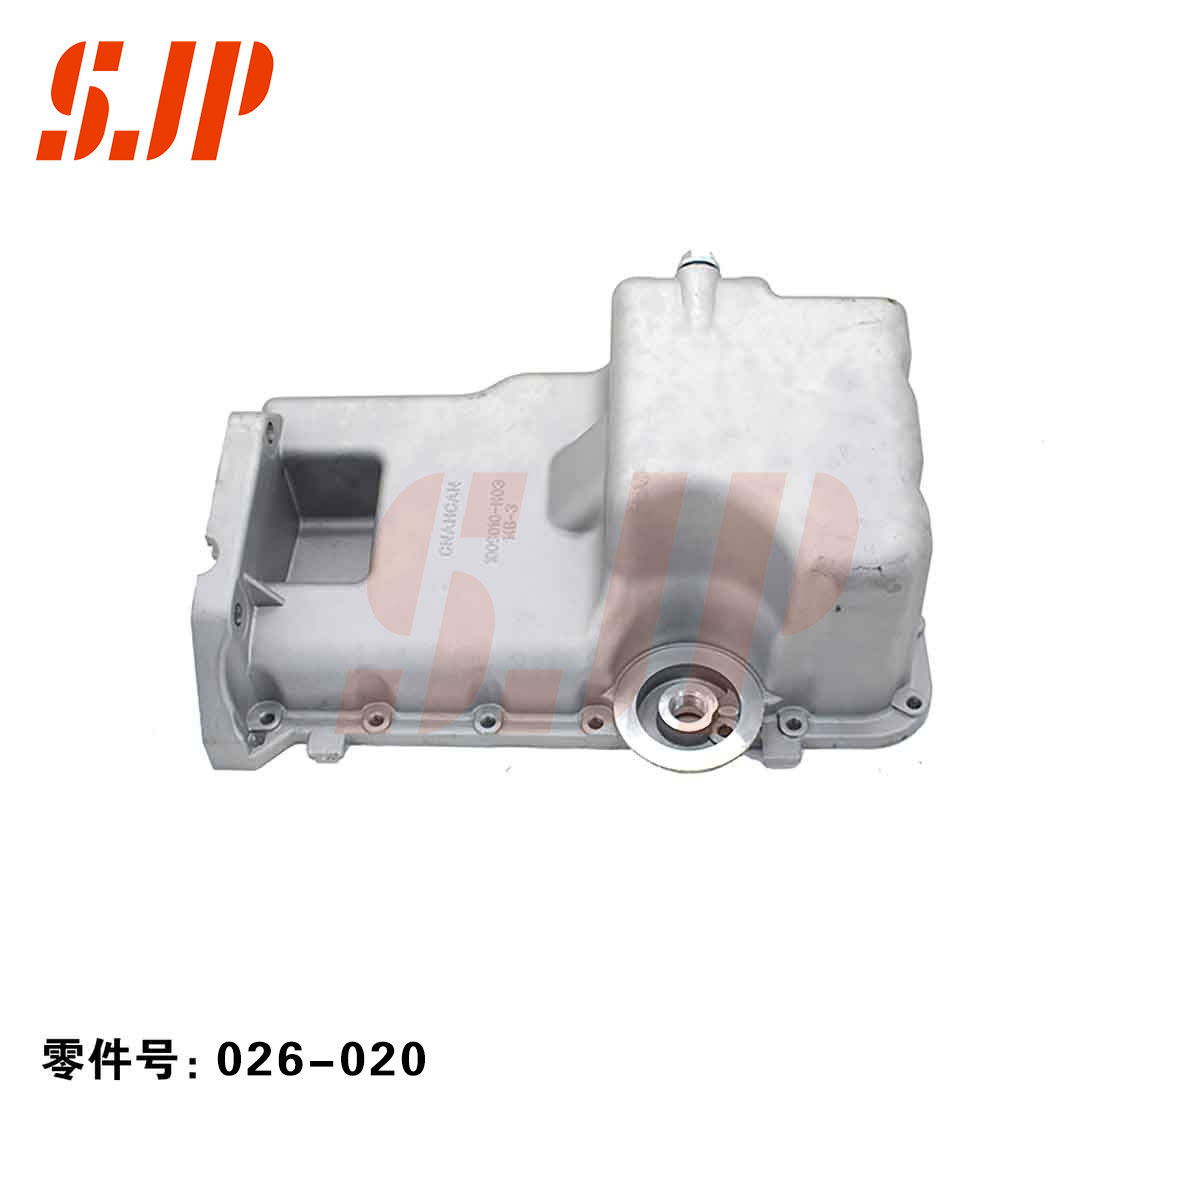 SJ-026-020 Engine Oil Pan/Sump For Eulove 1.4/1009010-H03